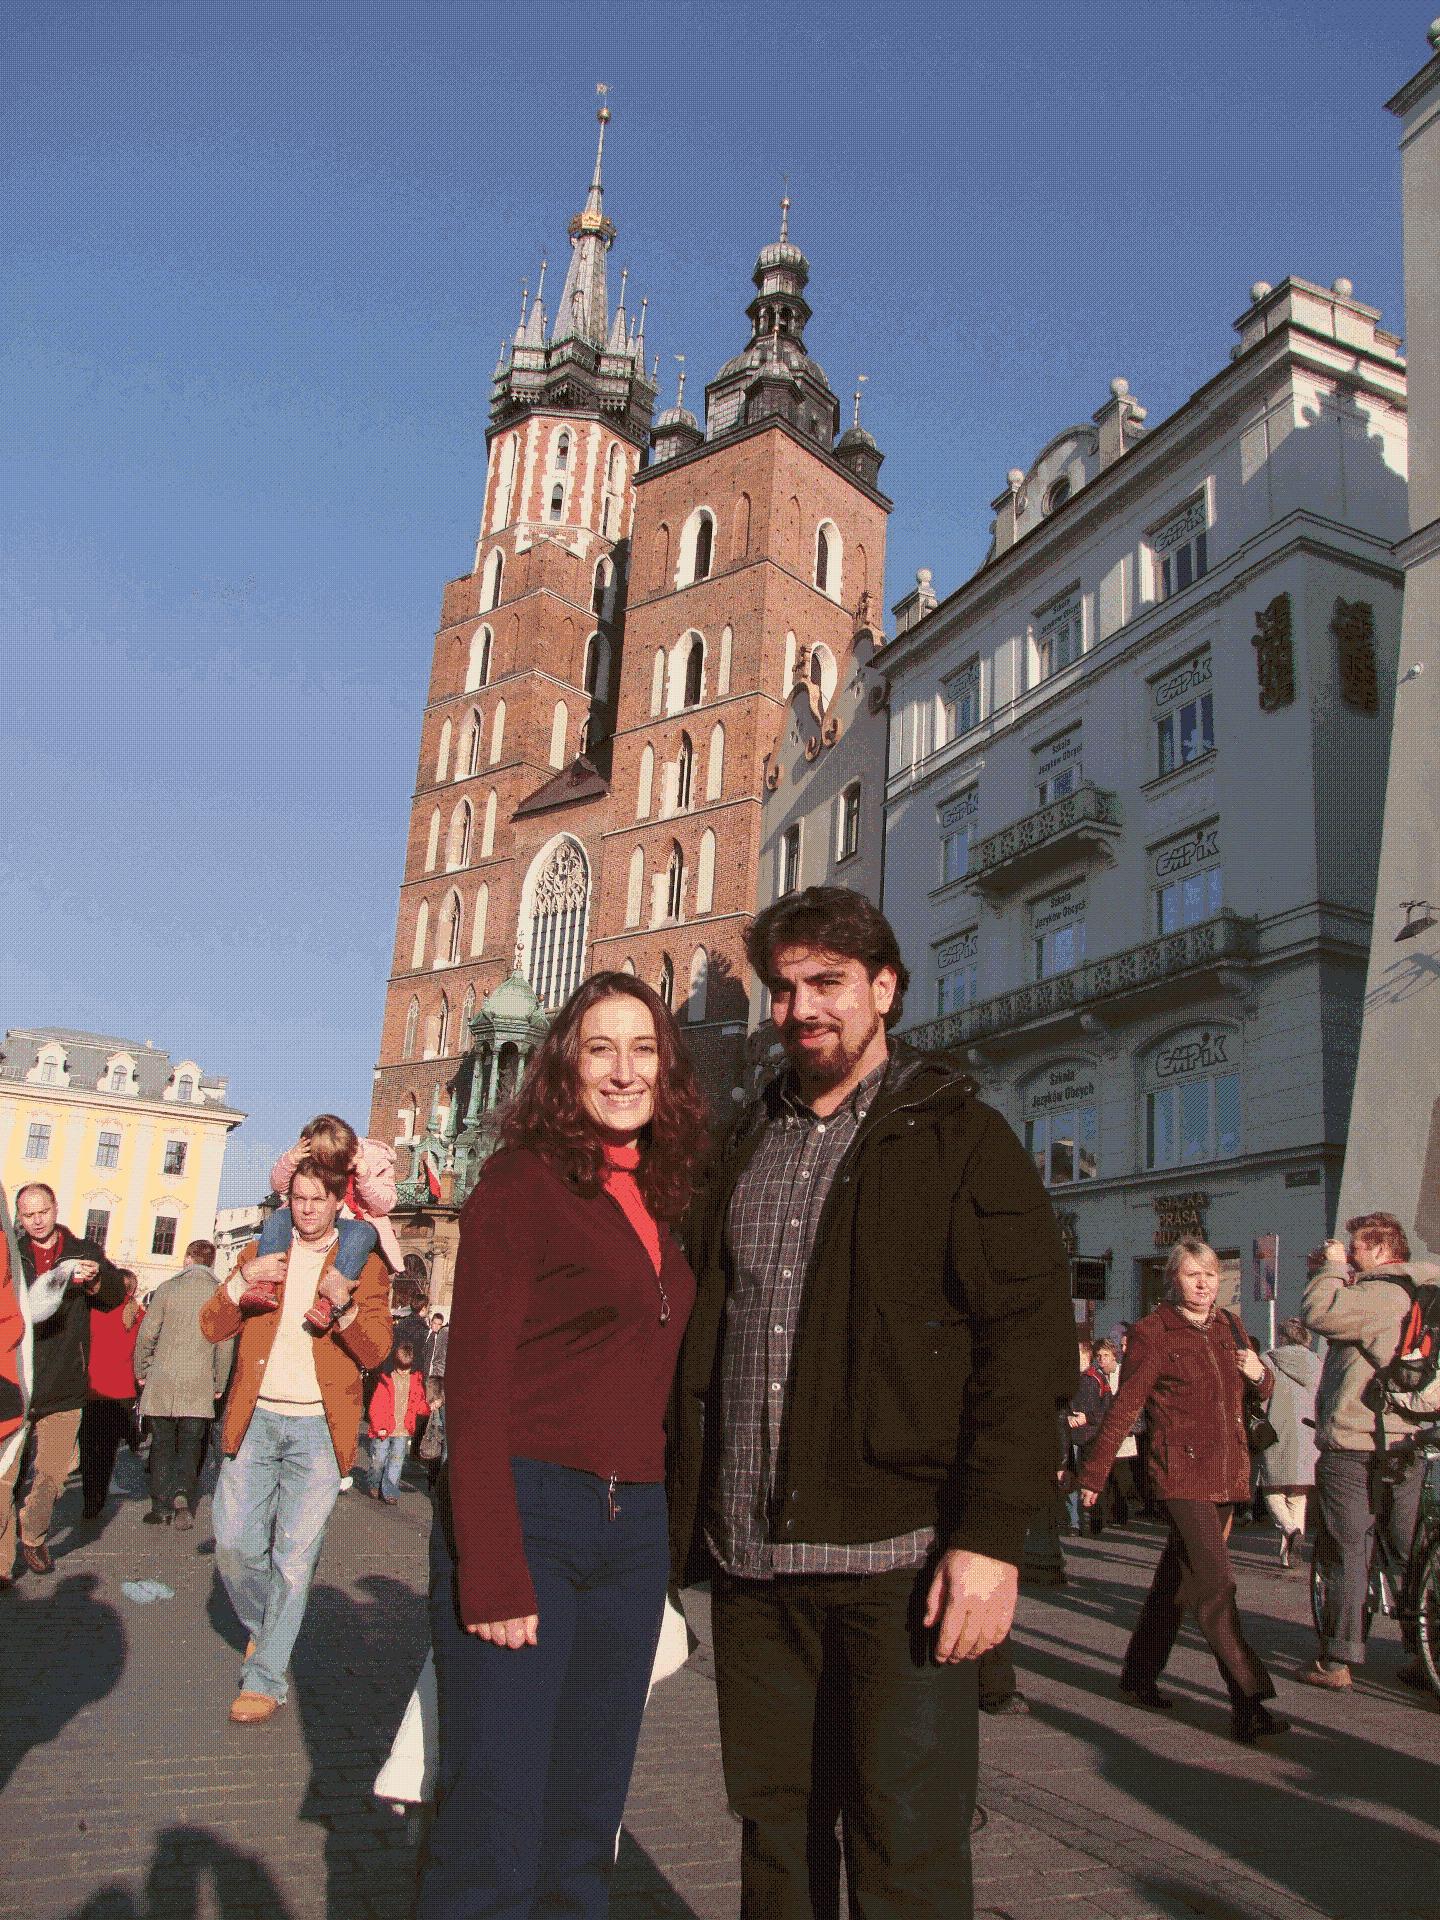 Krakow's Main Square and view on the Mariacki Church